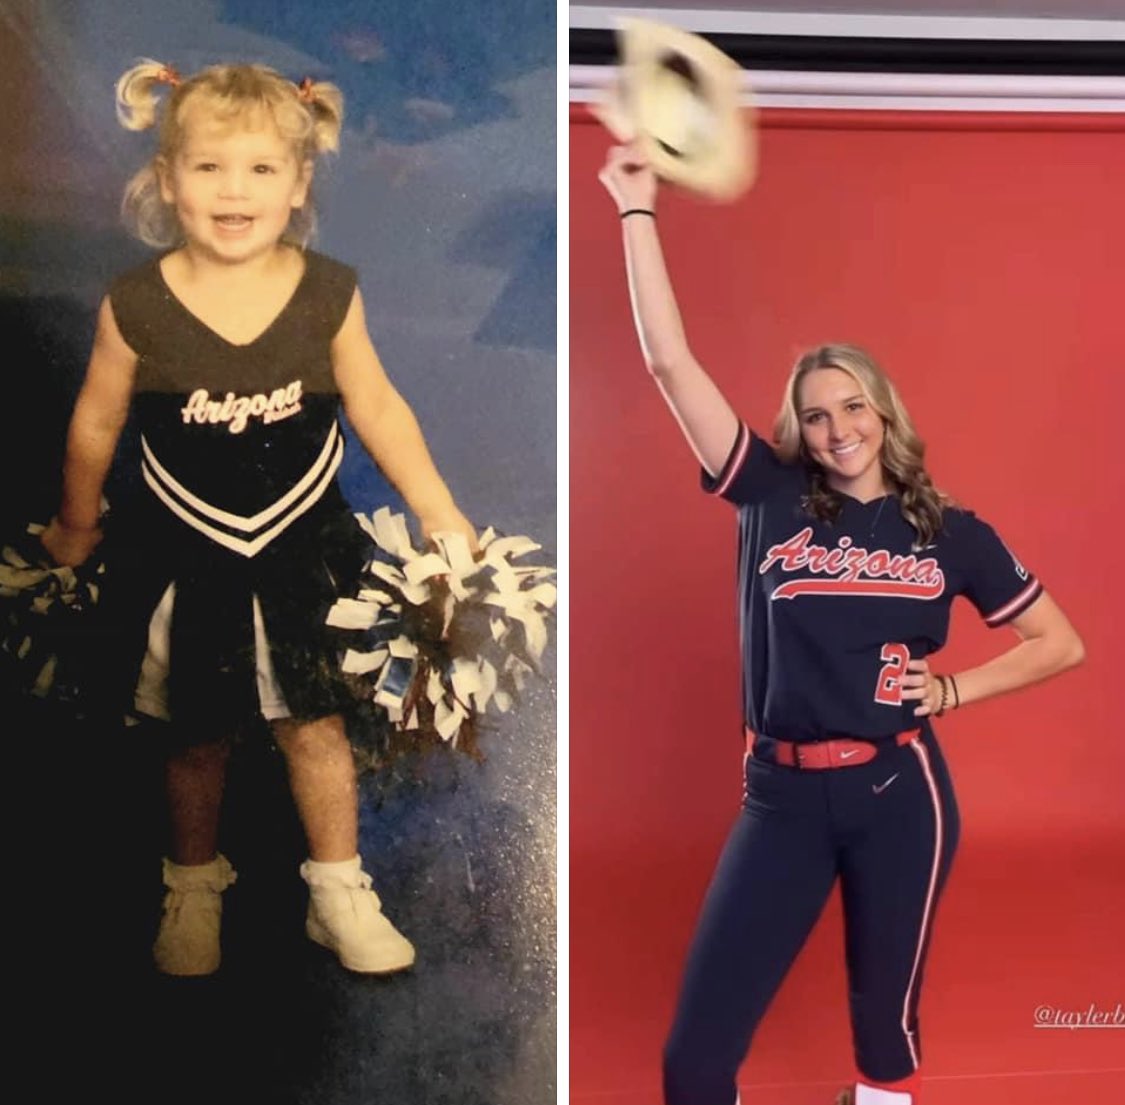 Looks like it was meant to be @Taylerbiehl20. But really a cheerleading outfit 🤣🤣.          @ArizonaSoftball